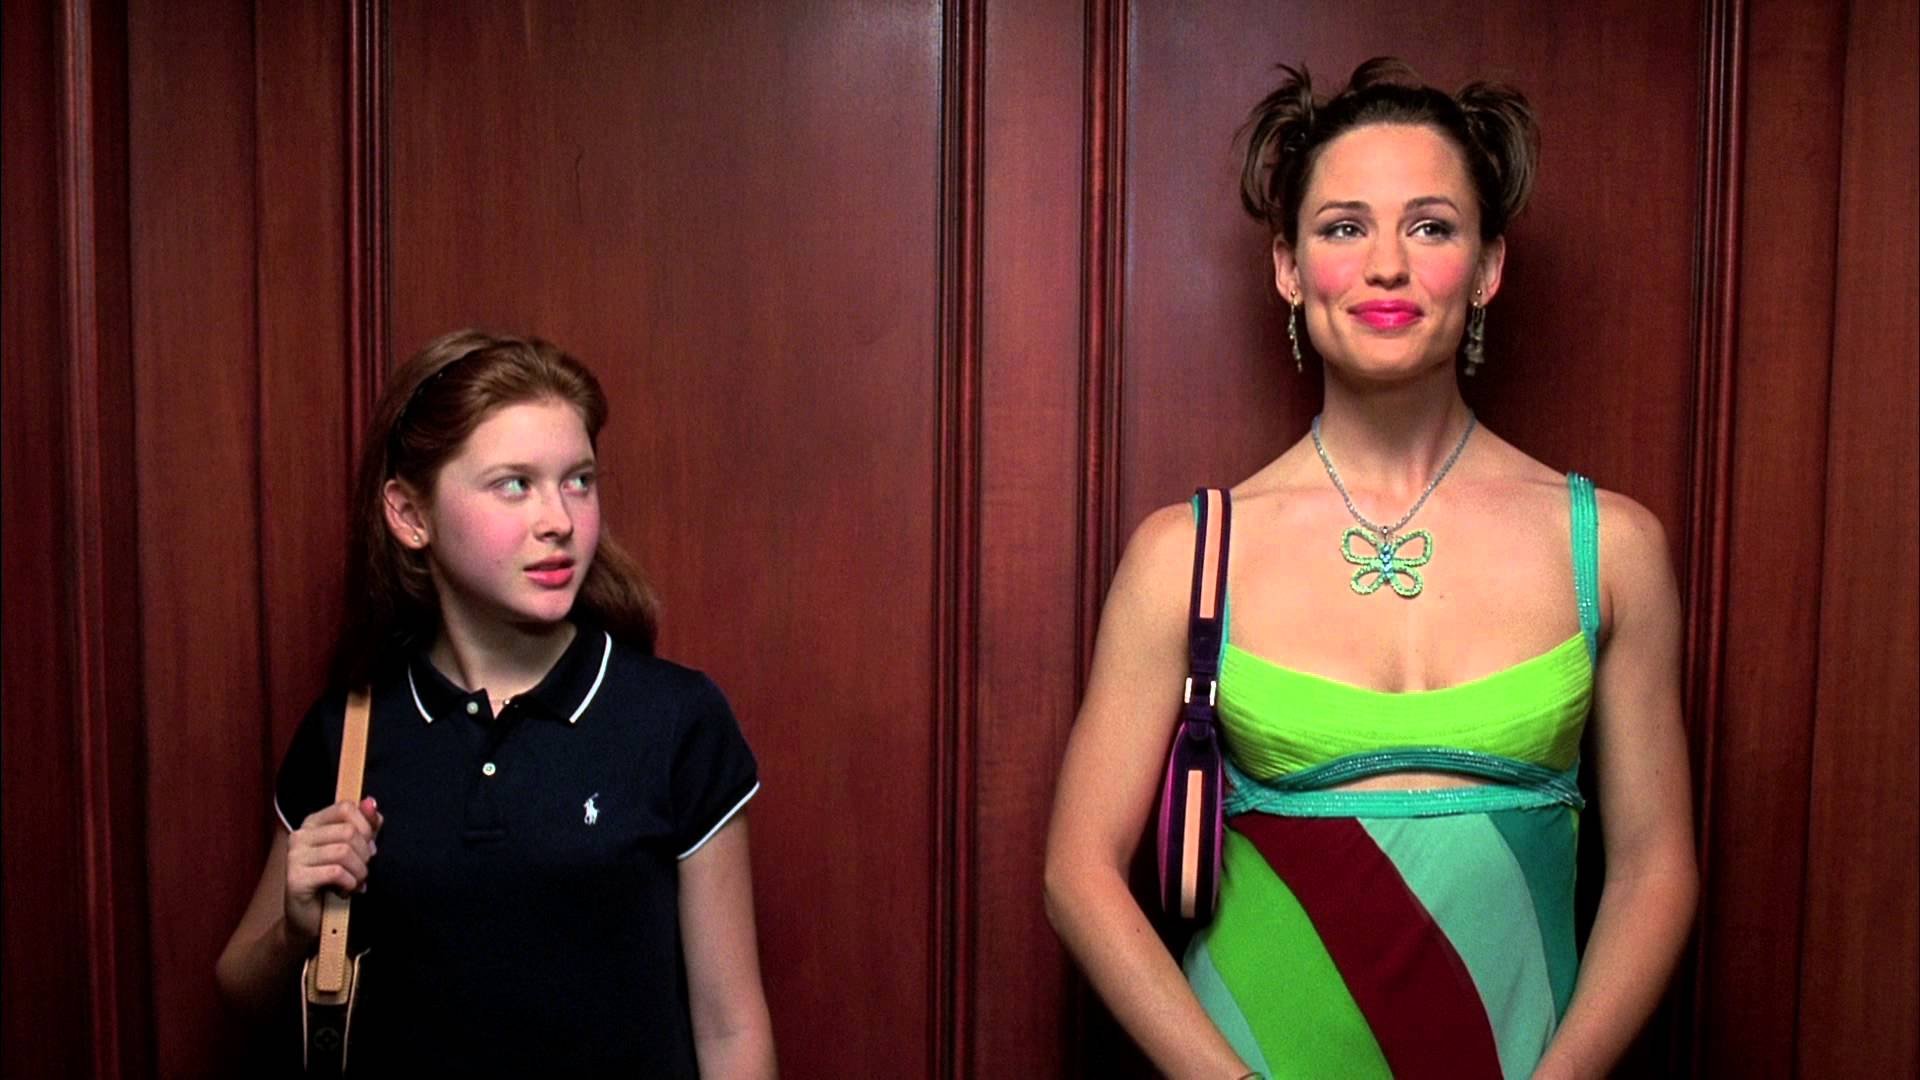 2. 13 going on 30.